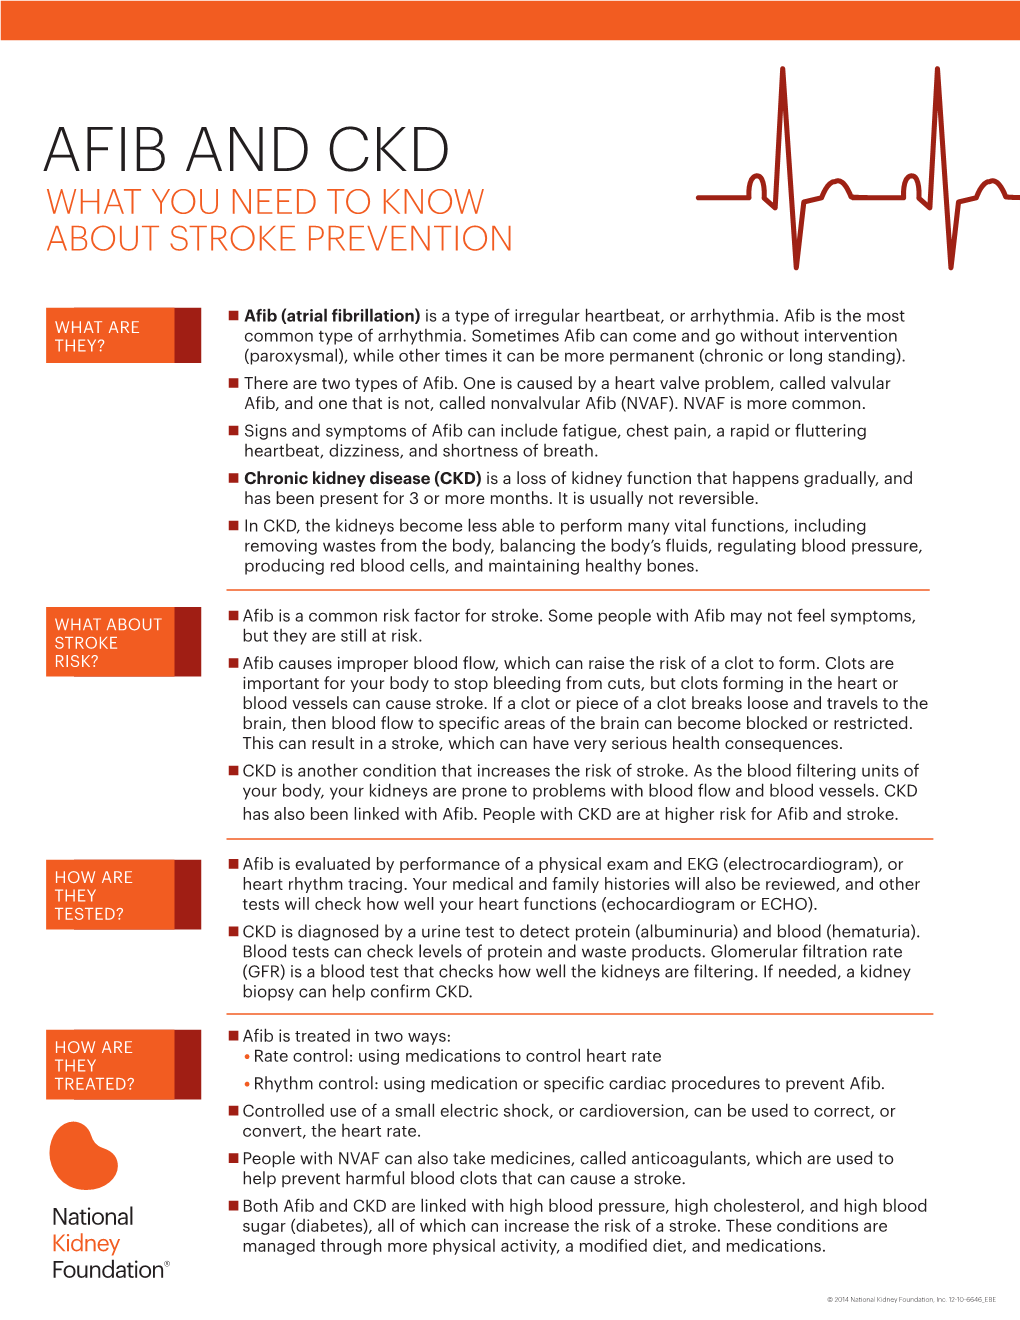 Afib and Ckd What You Need to Know About Stroke Prevention